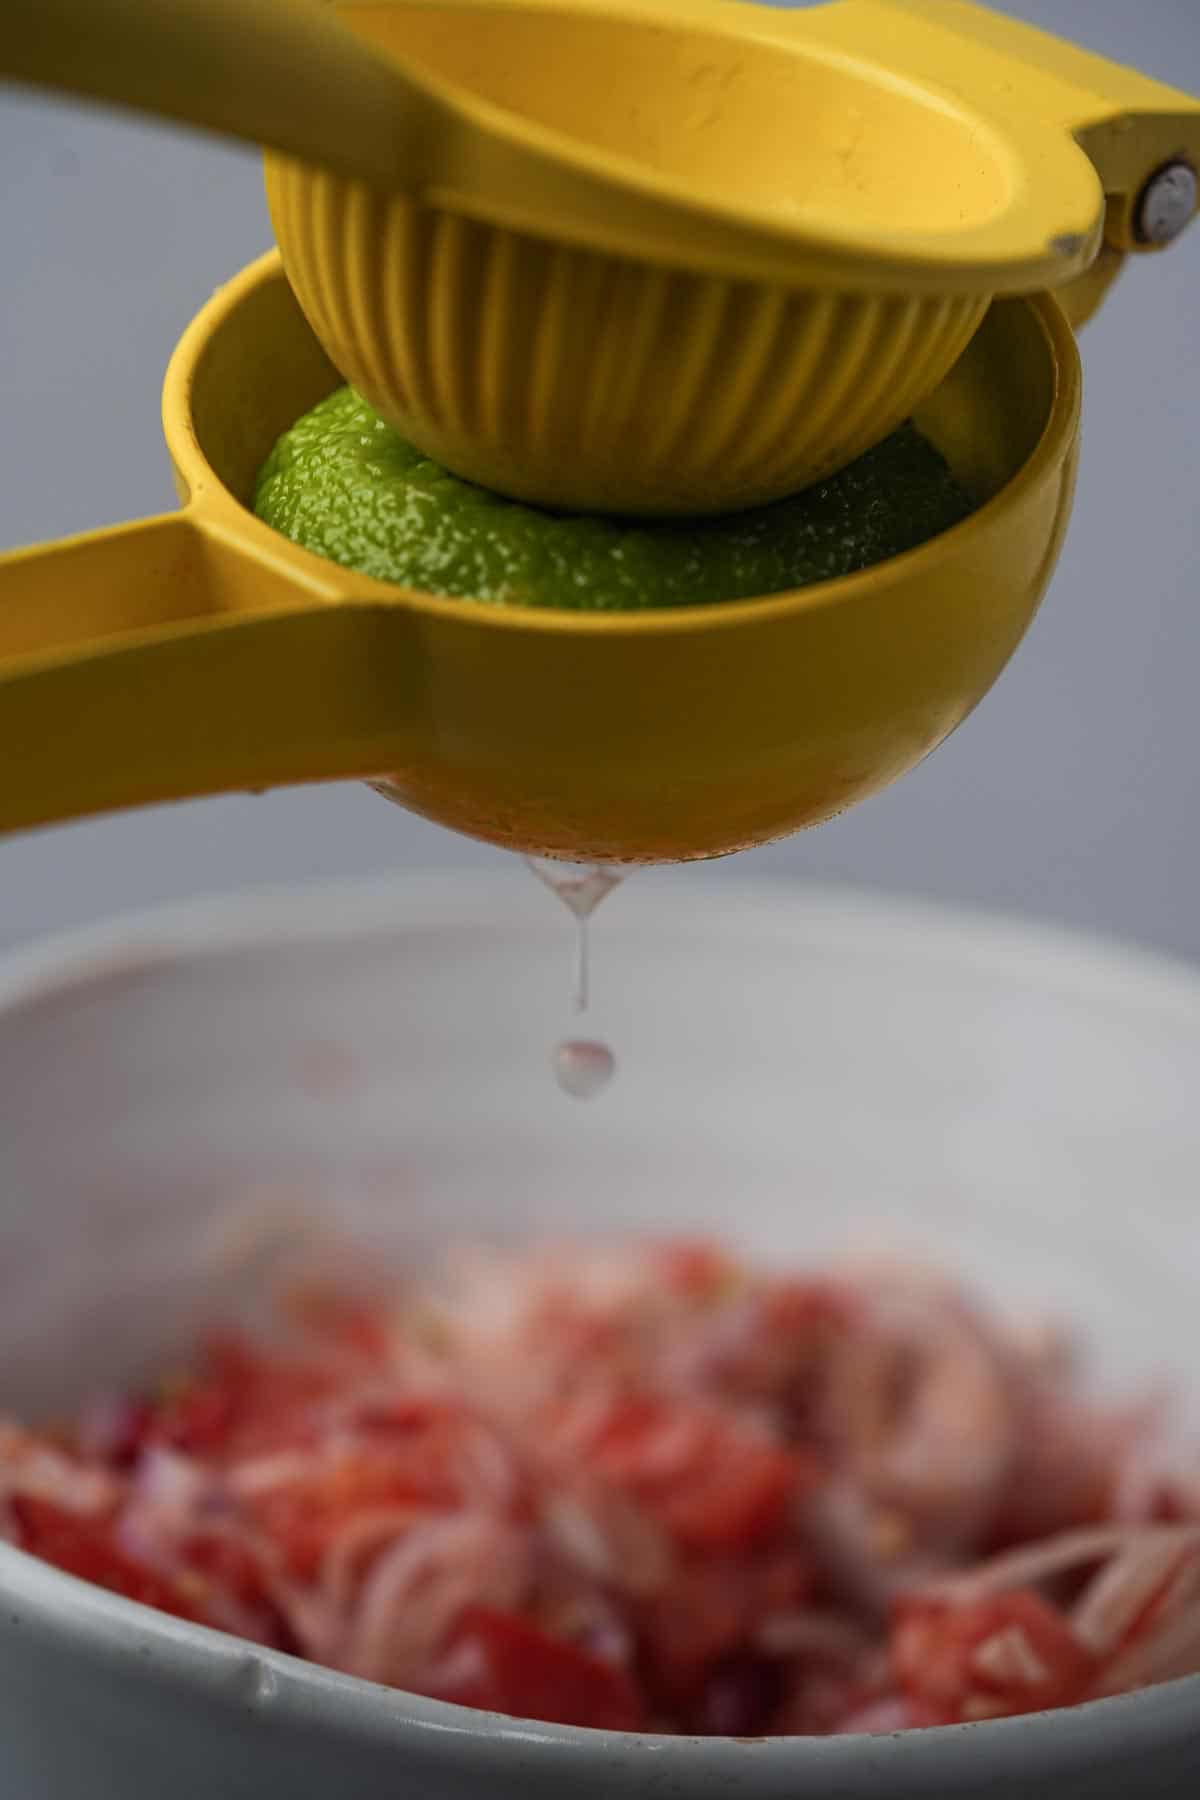 A yellow citrus squeezer is being used to juice lime into a bowl of shallots and tomatoes.